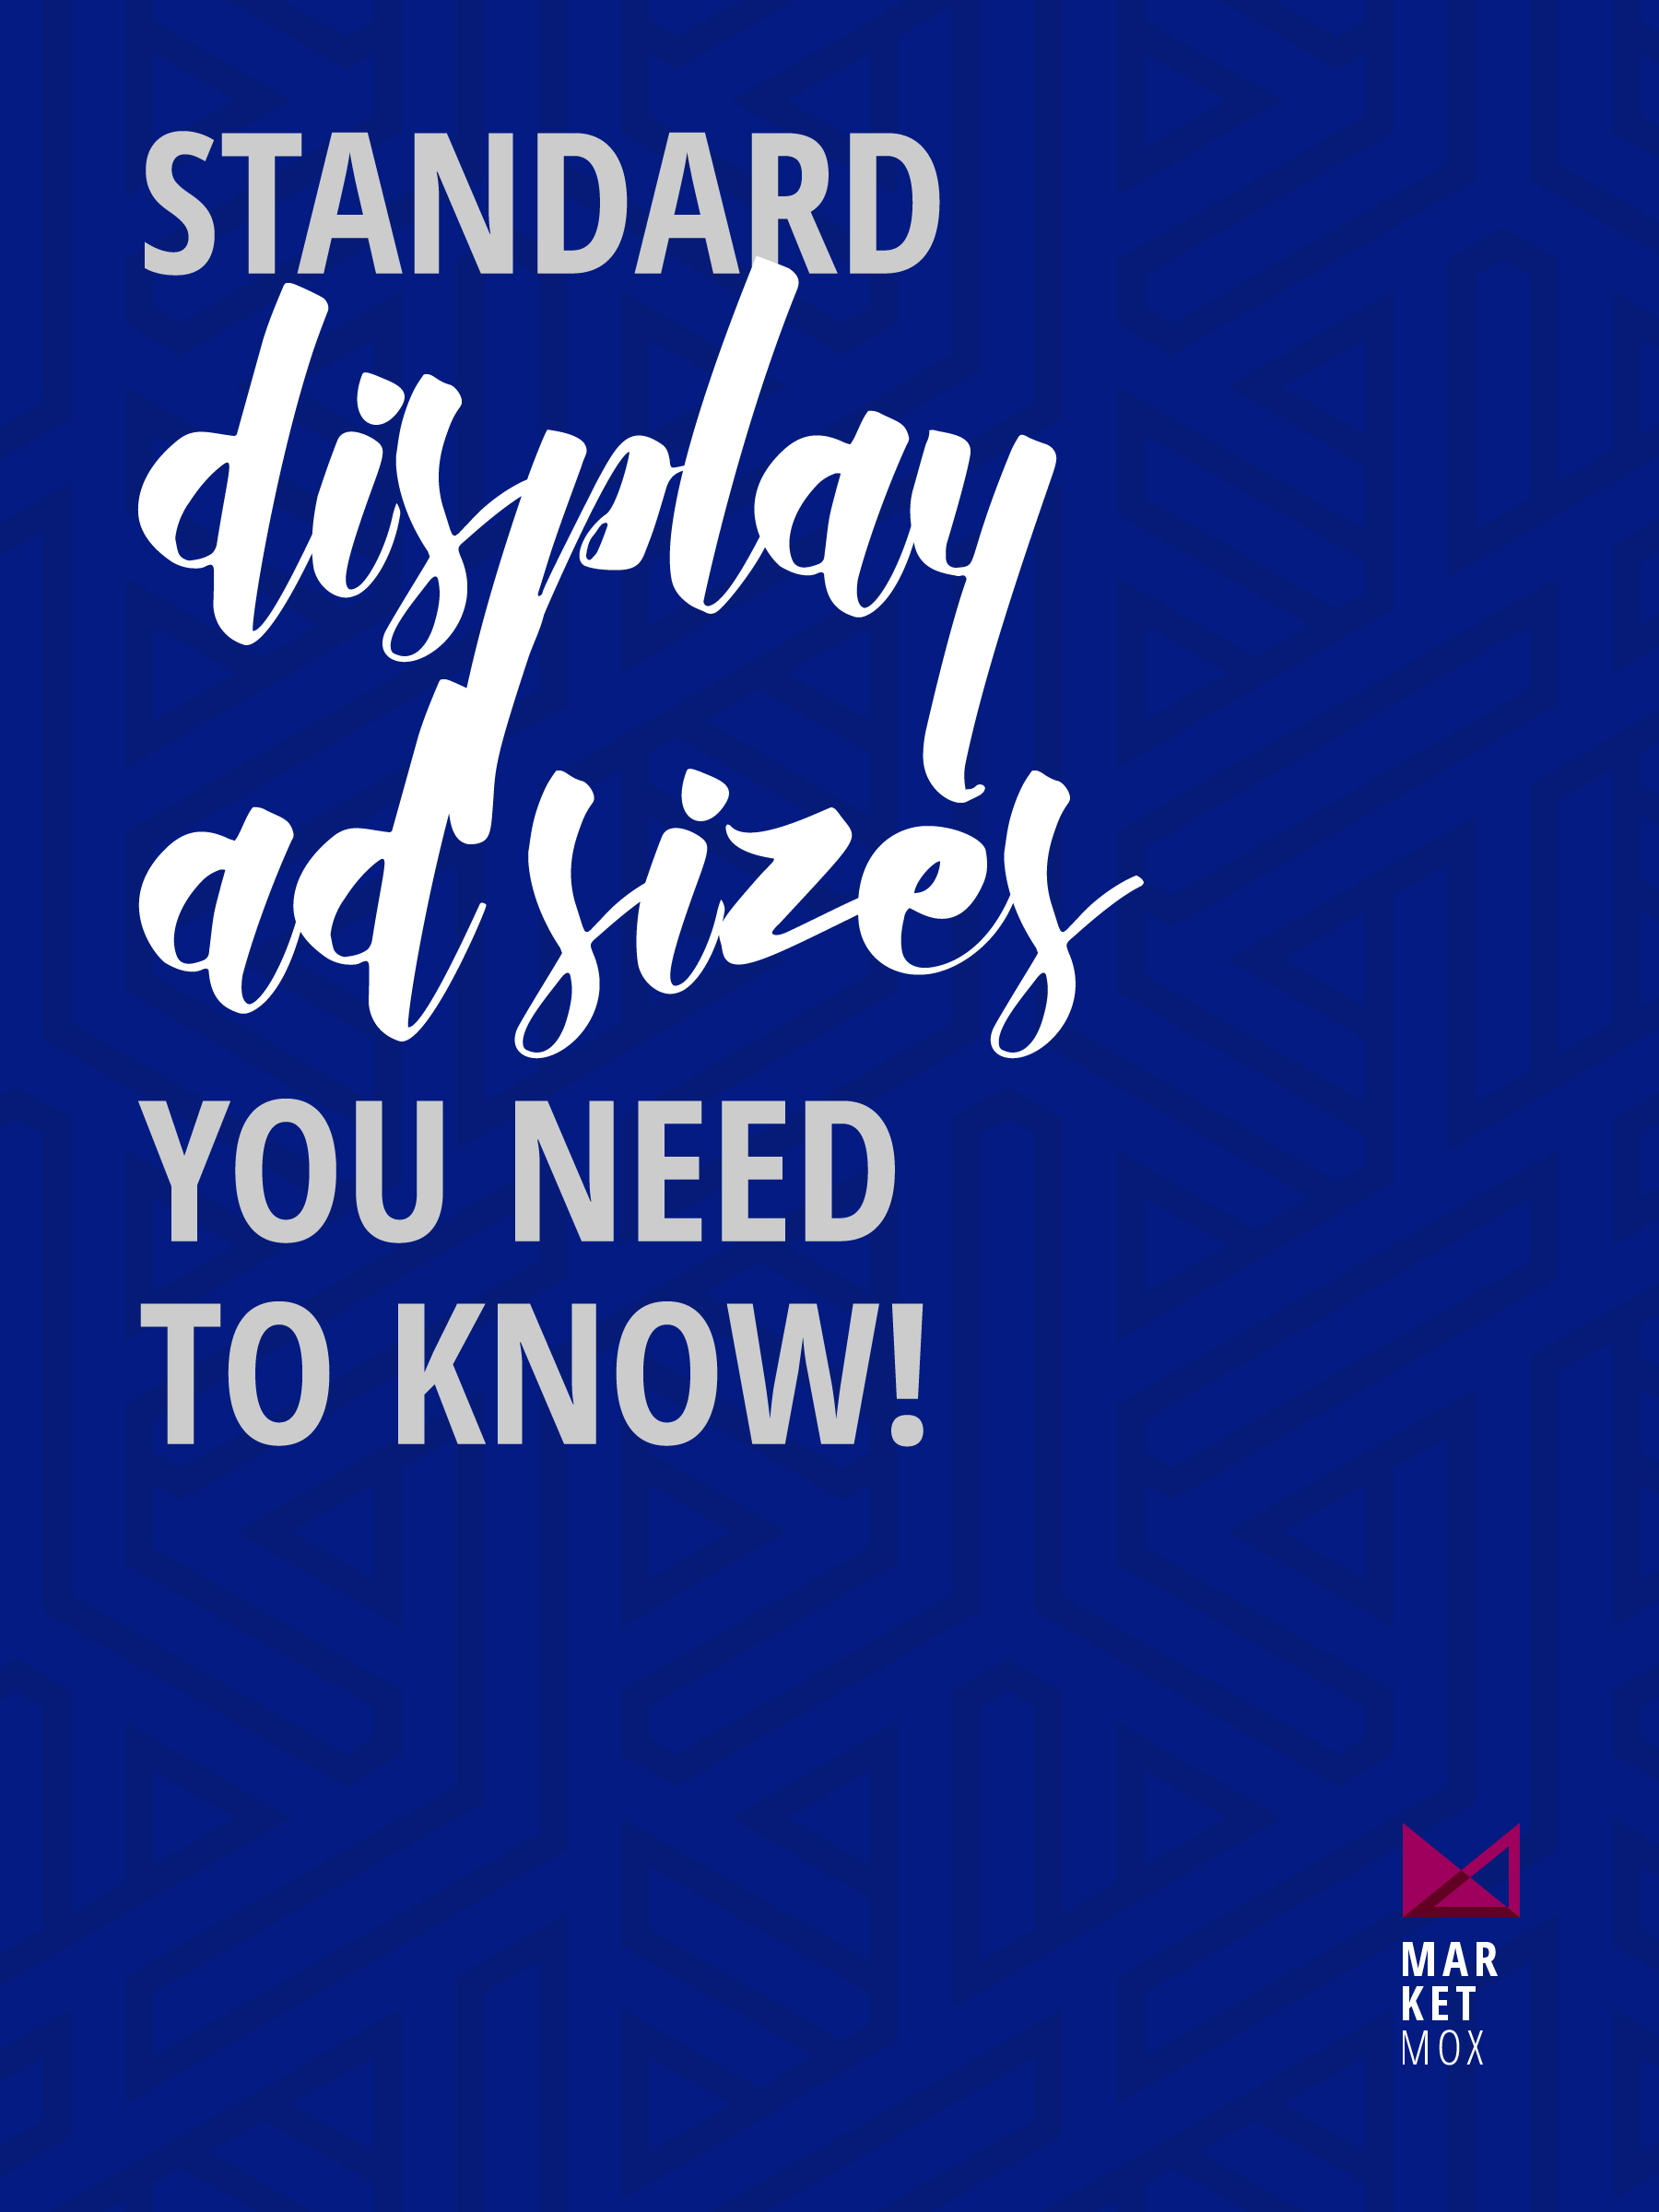 Finally! This was so helpful. It explains so much! | Display Advertising Sizes You Need To Know @marketmox